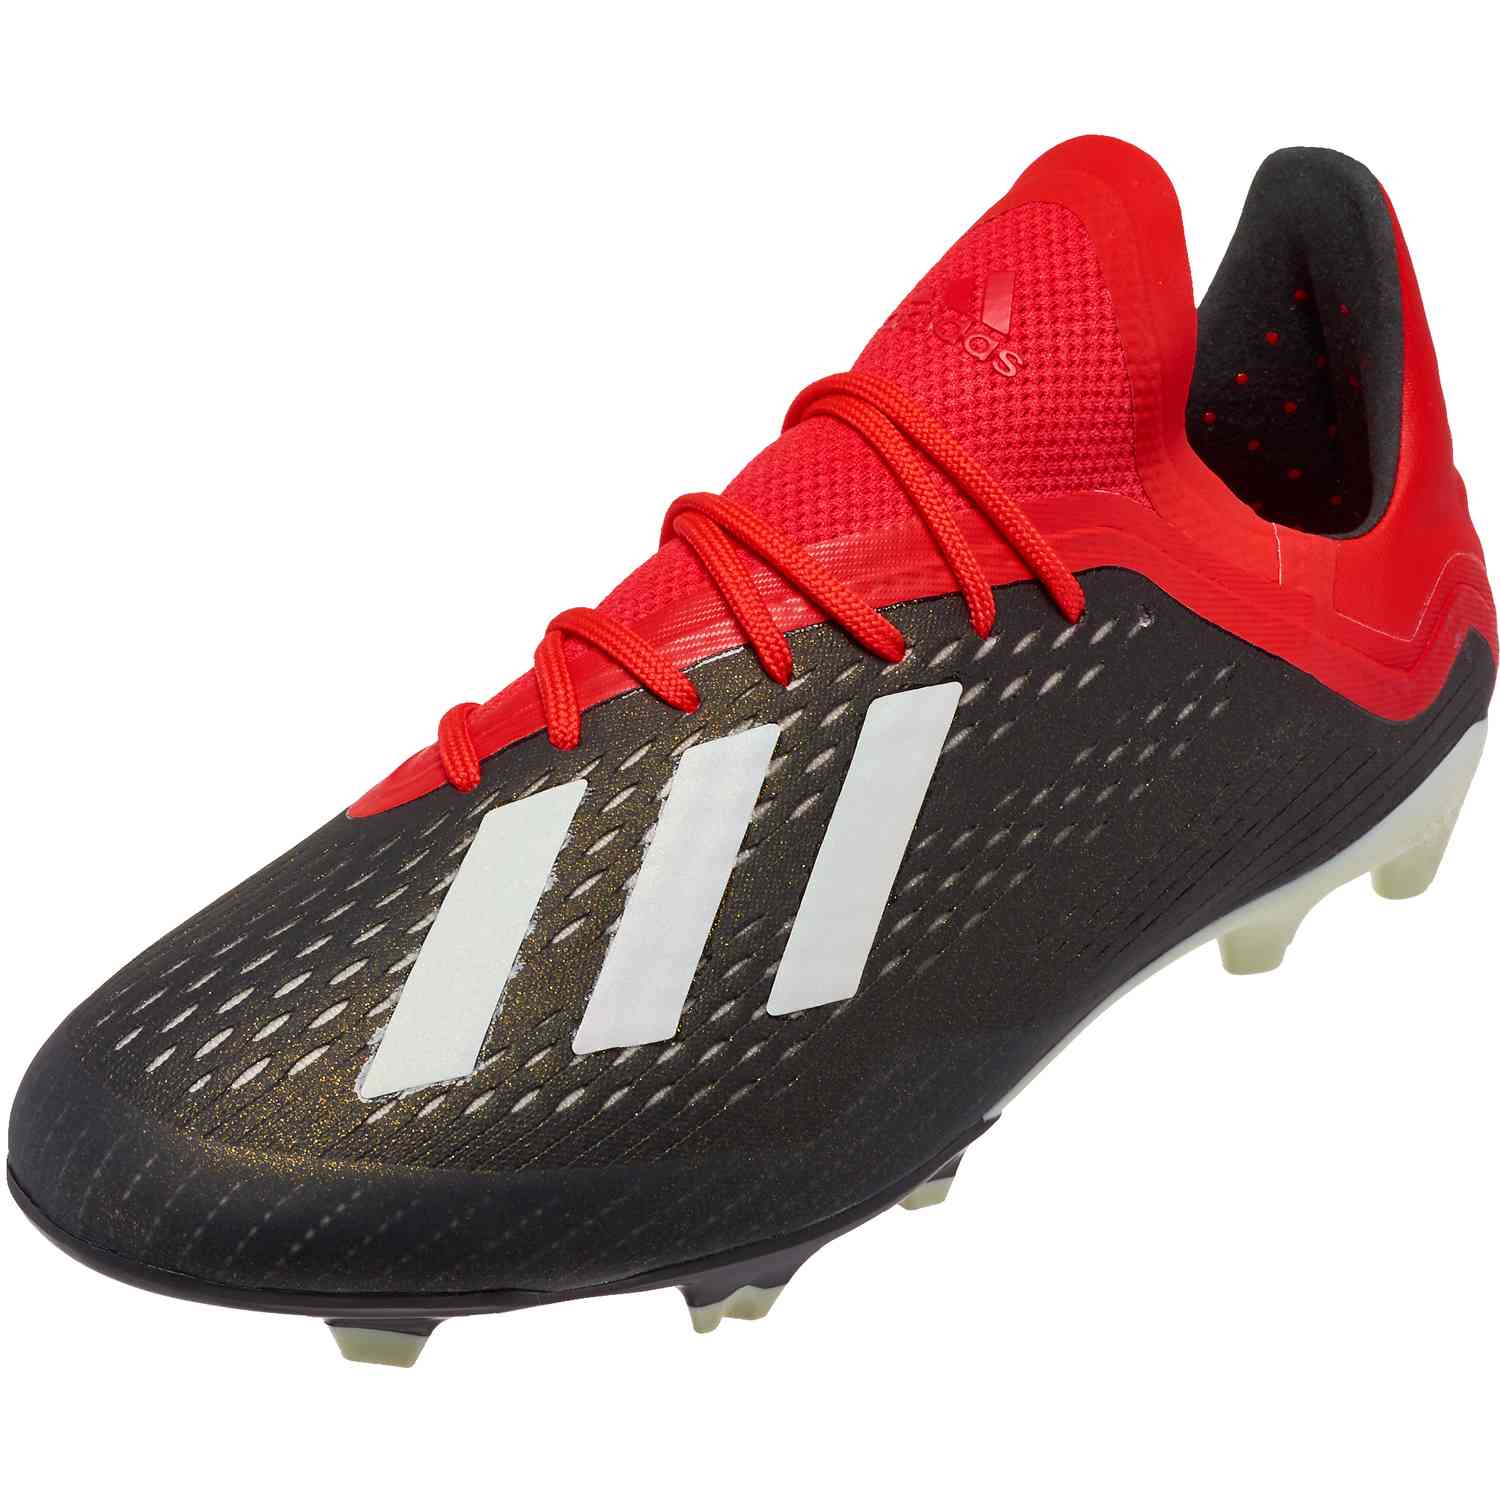 adidas x 18.1 for sale